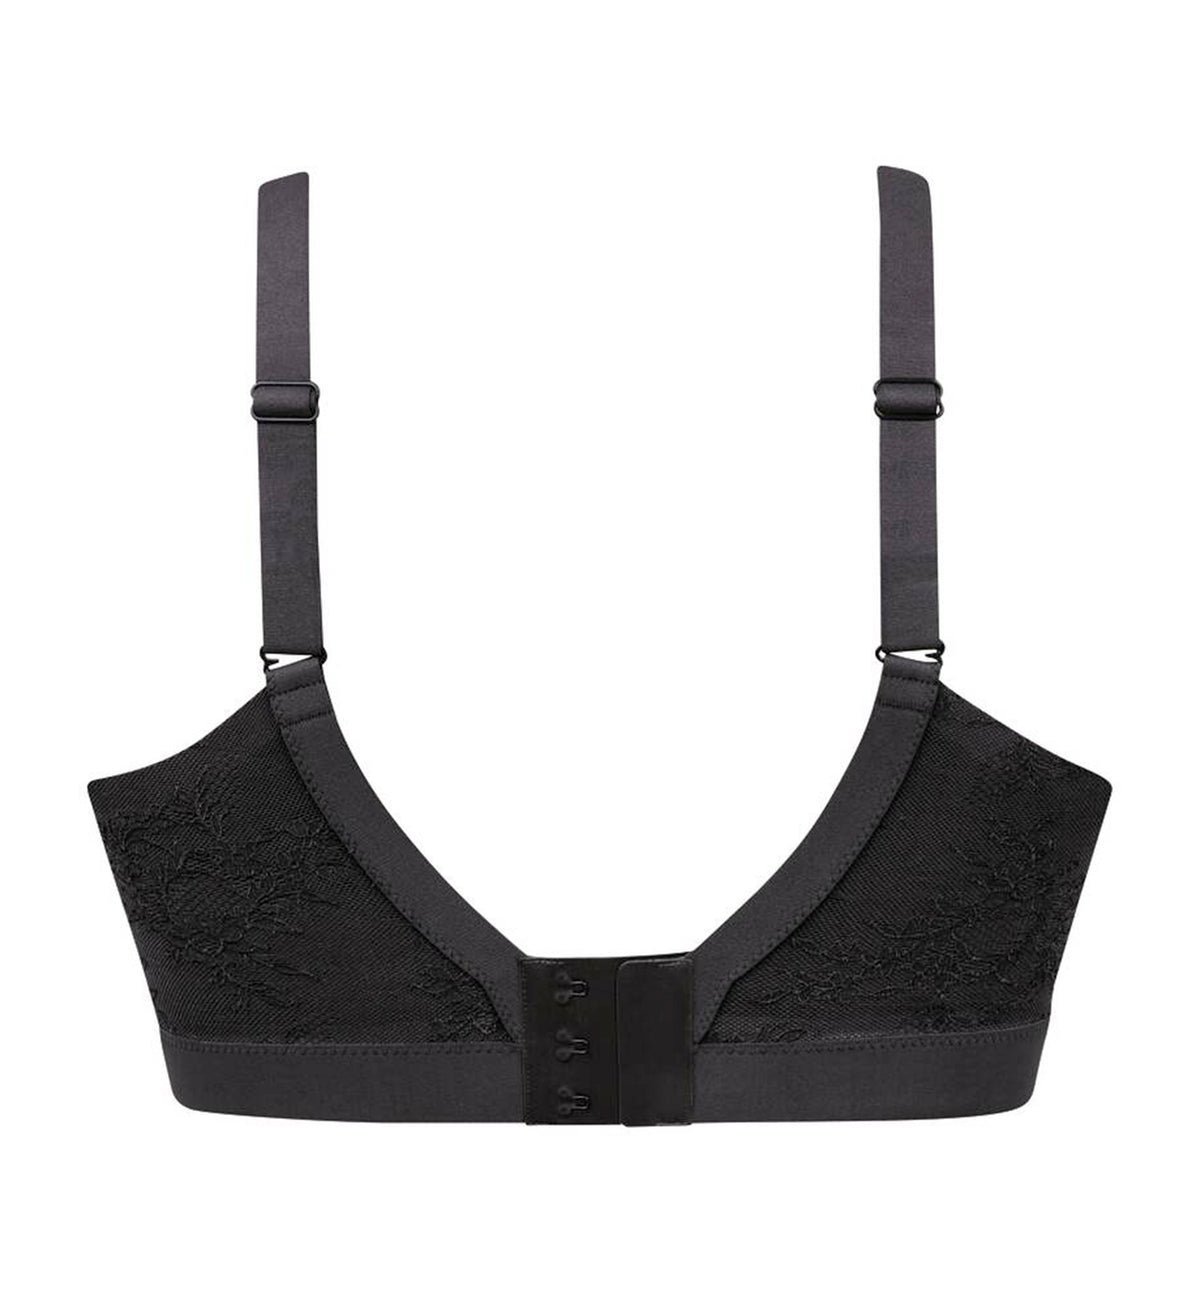 Anita Essential Lace Lightly Padded NURSING Bralette (5057),Small,Anthracite - Anthracite,Small